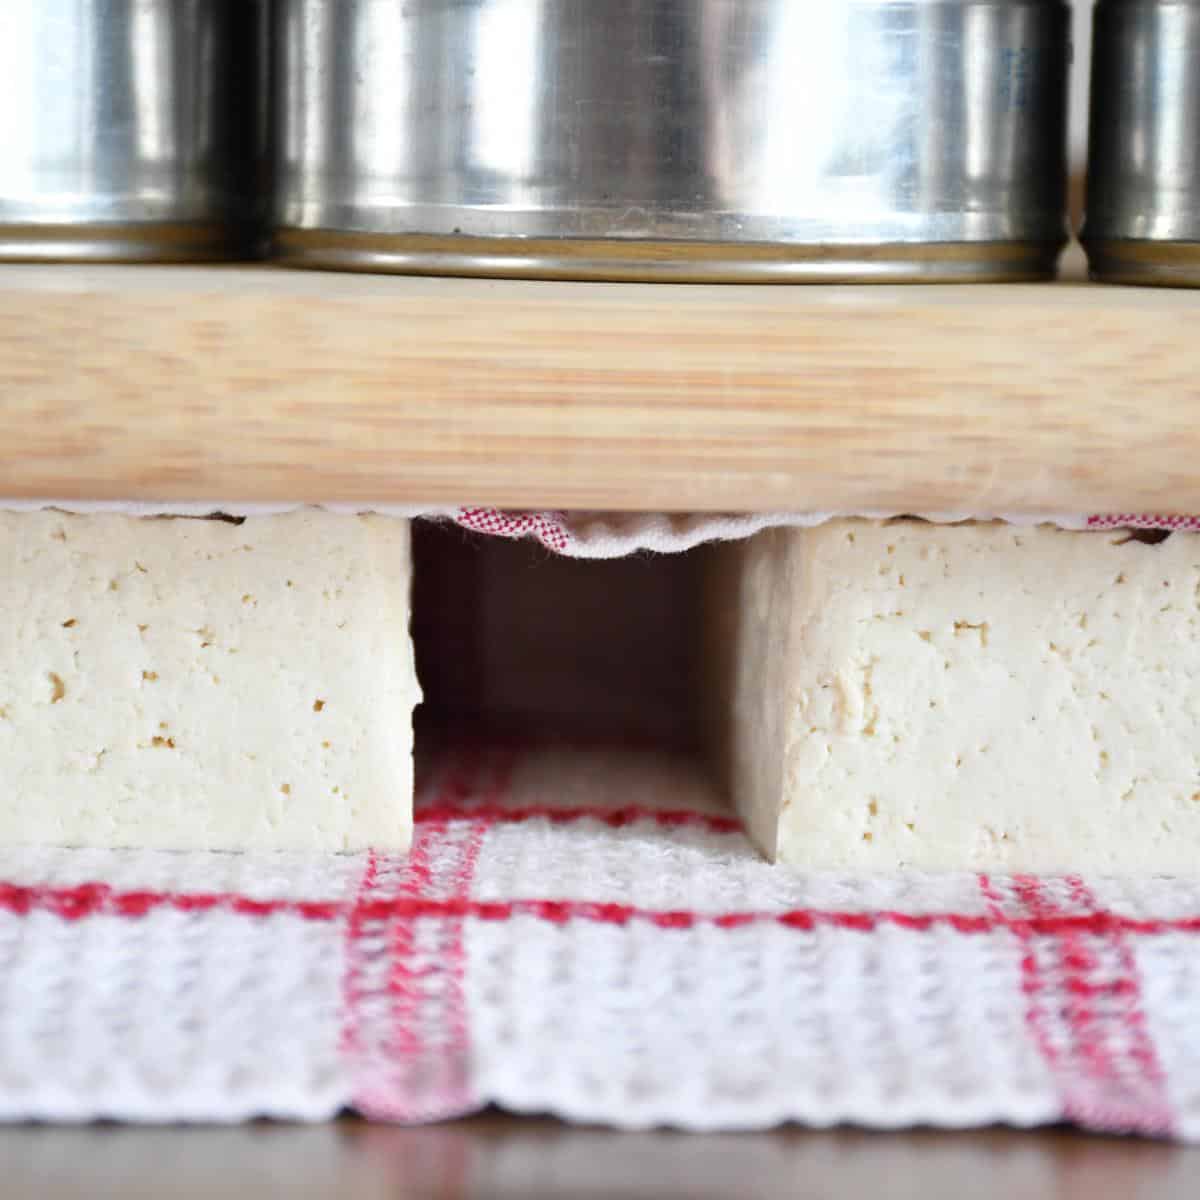 Pressing the tofu between two cutting boards to remove as much liquid as possible.